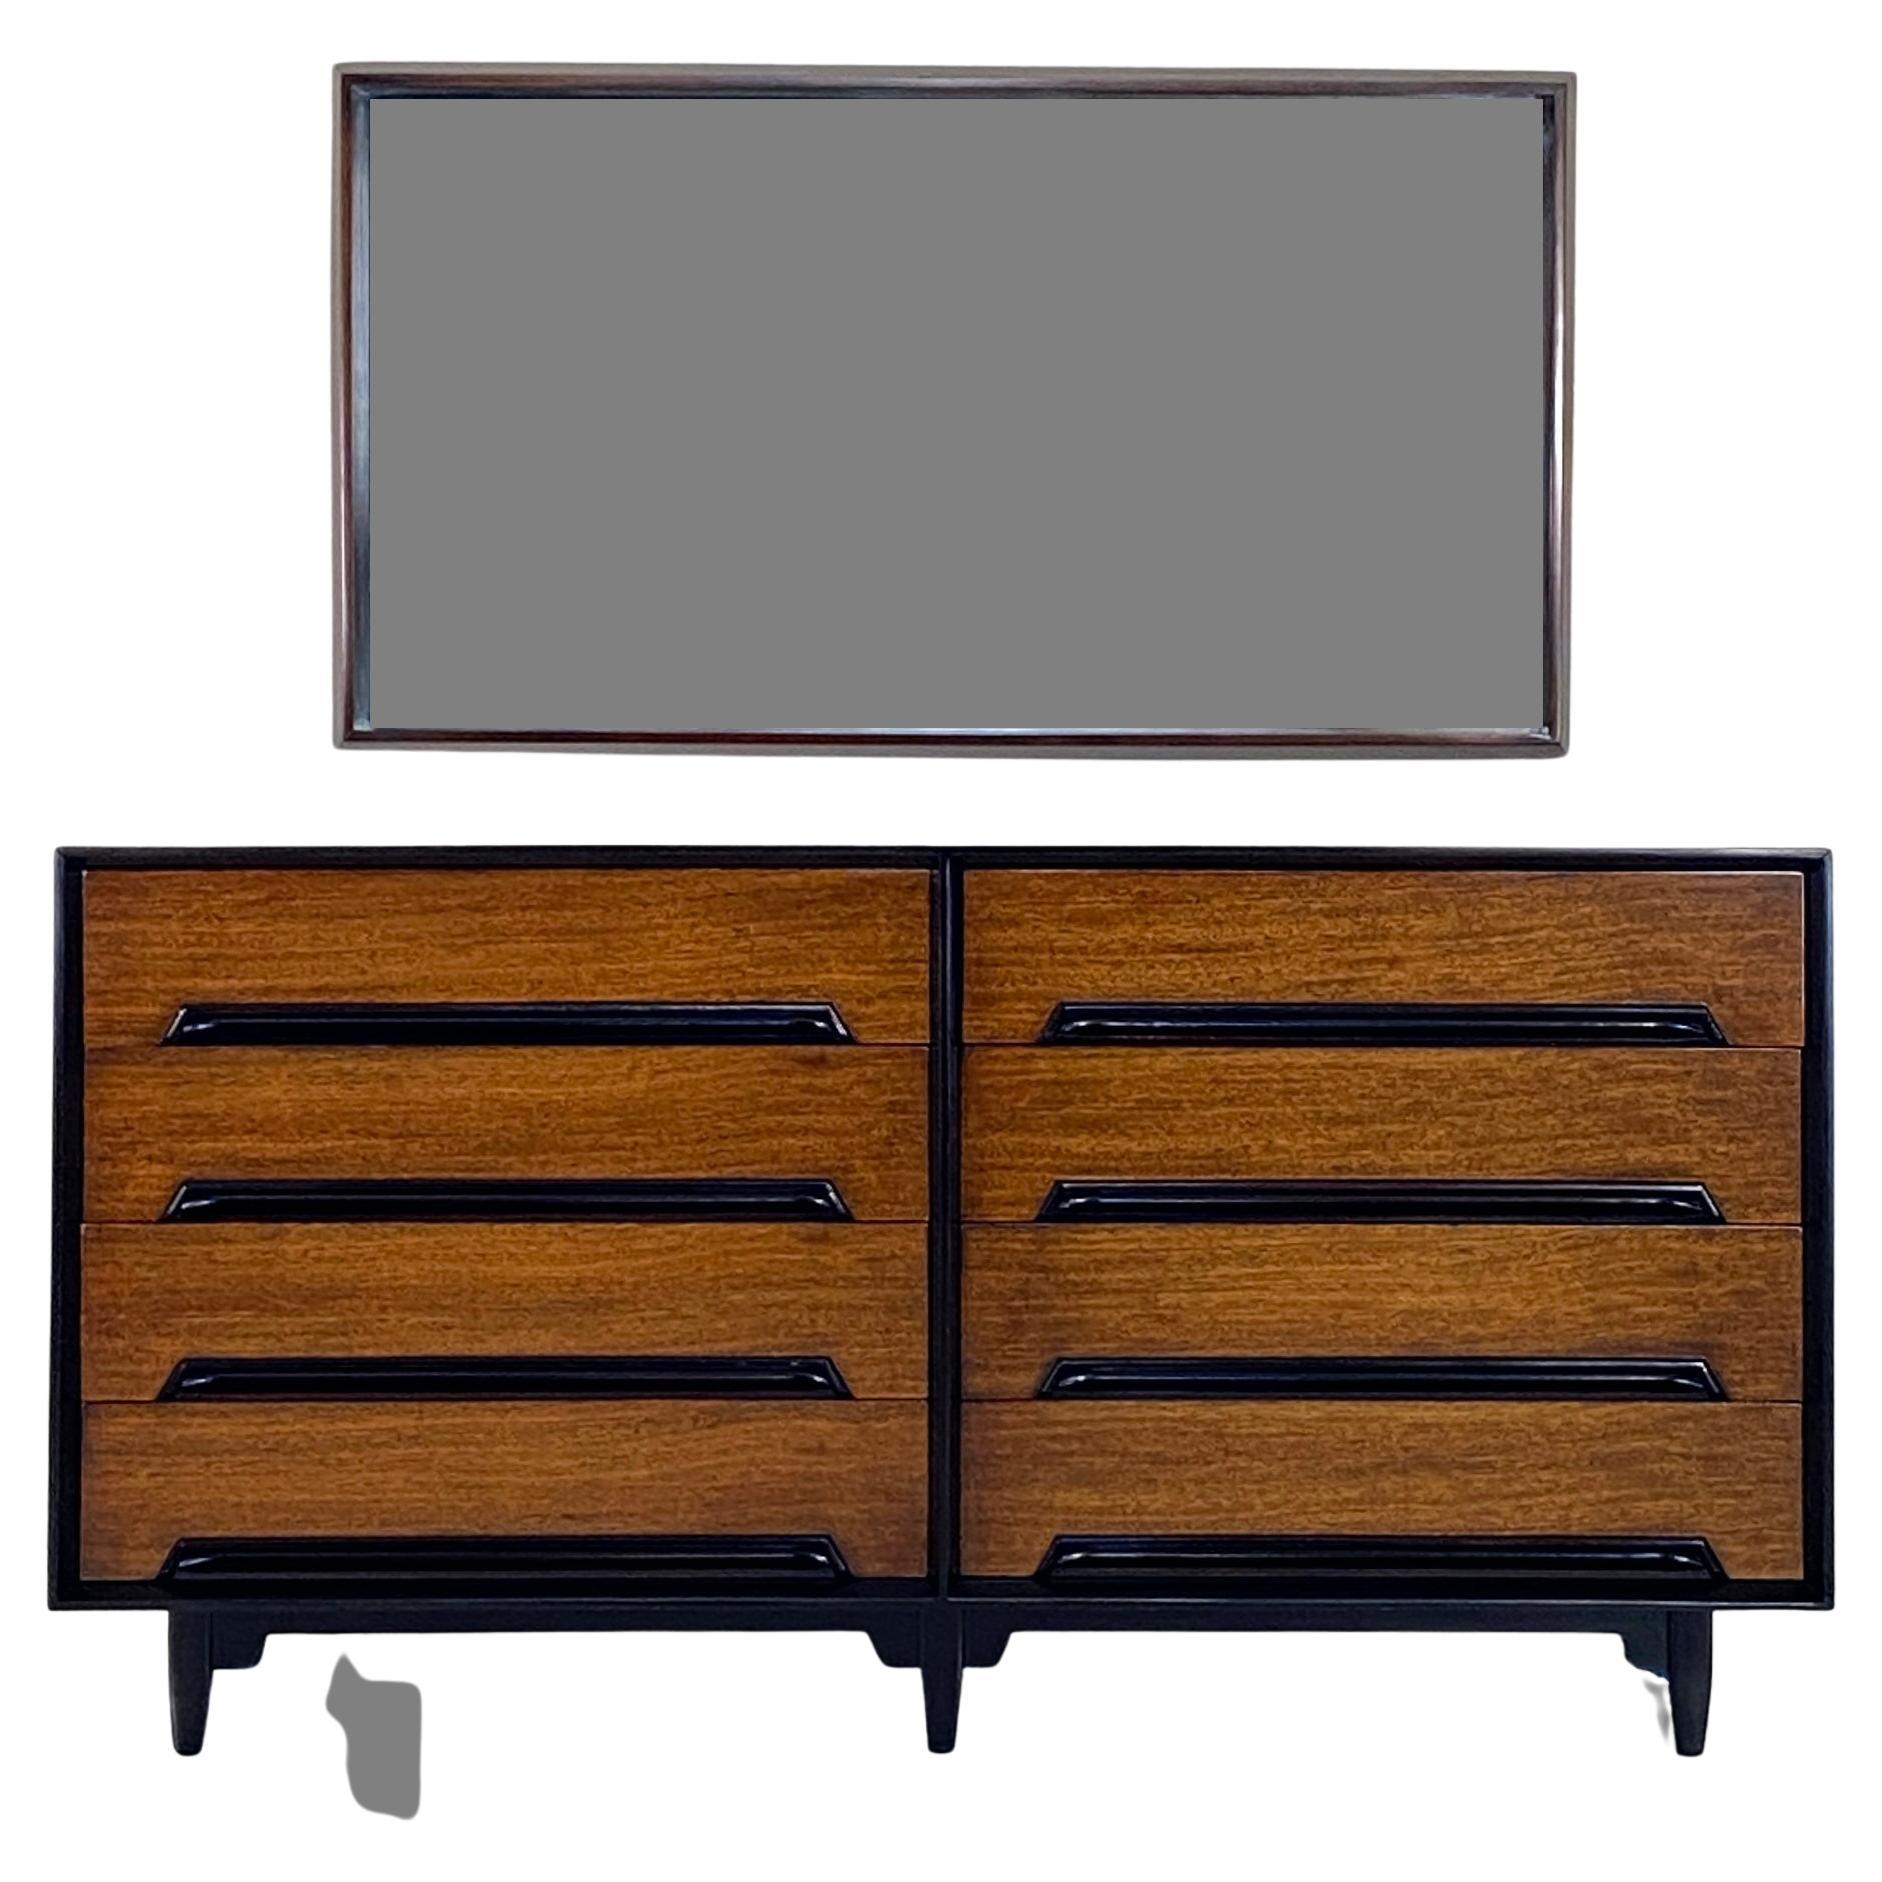 Rare dresser with matching mirror by Milo Baughman for Drexel Perspective in Mindoro Wood 1952. The mirror of the series almost never seen, measures 49 3/4